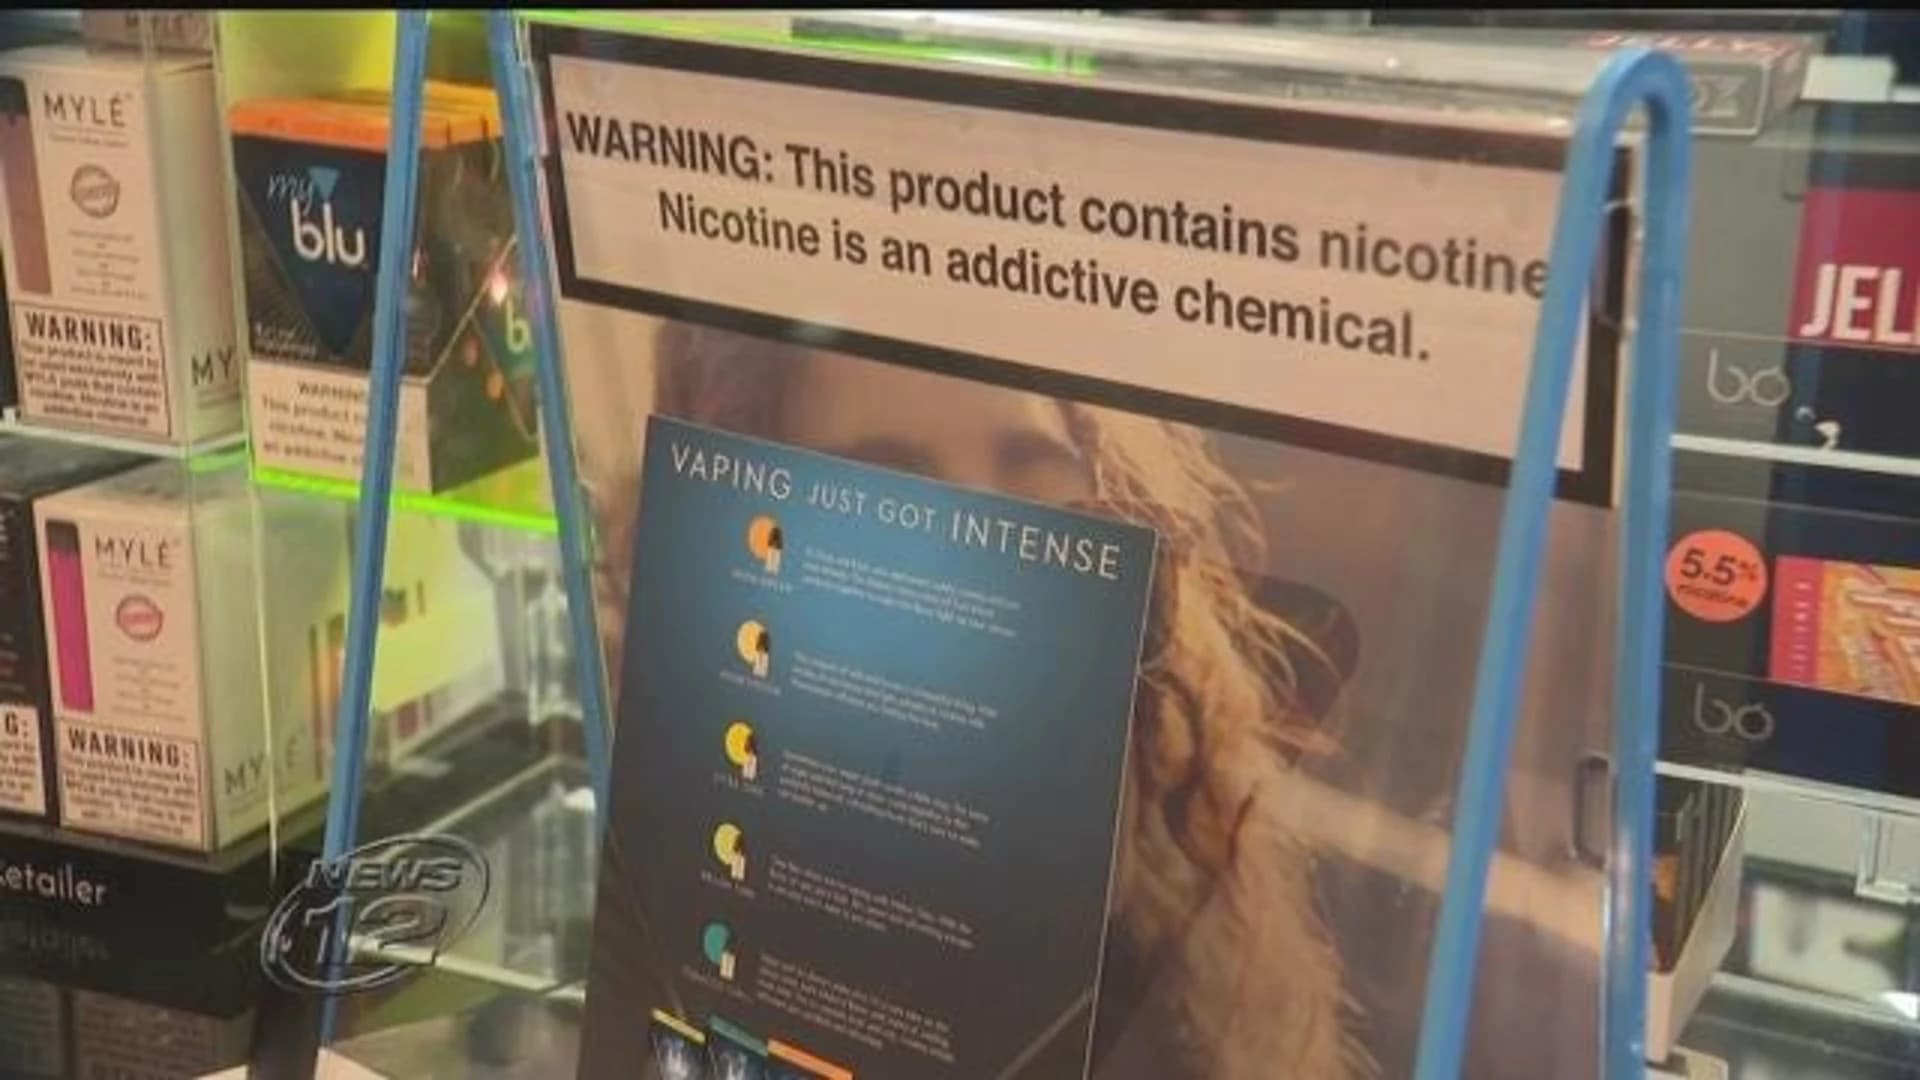 NJ lawmaker introduces bill to prevent use of e-cigs among teens